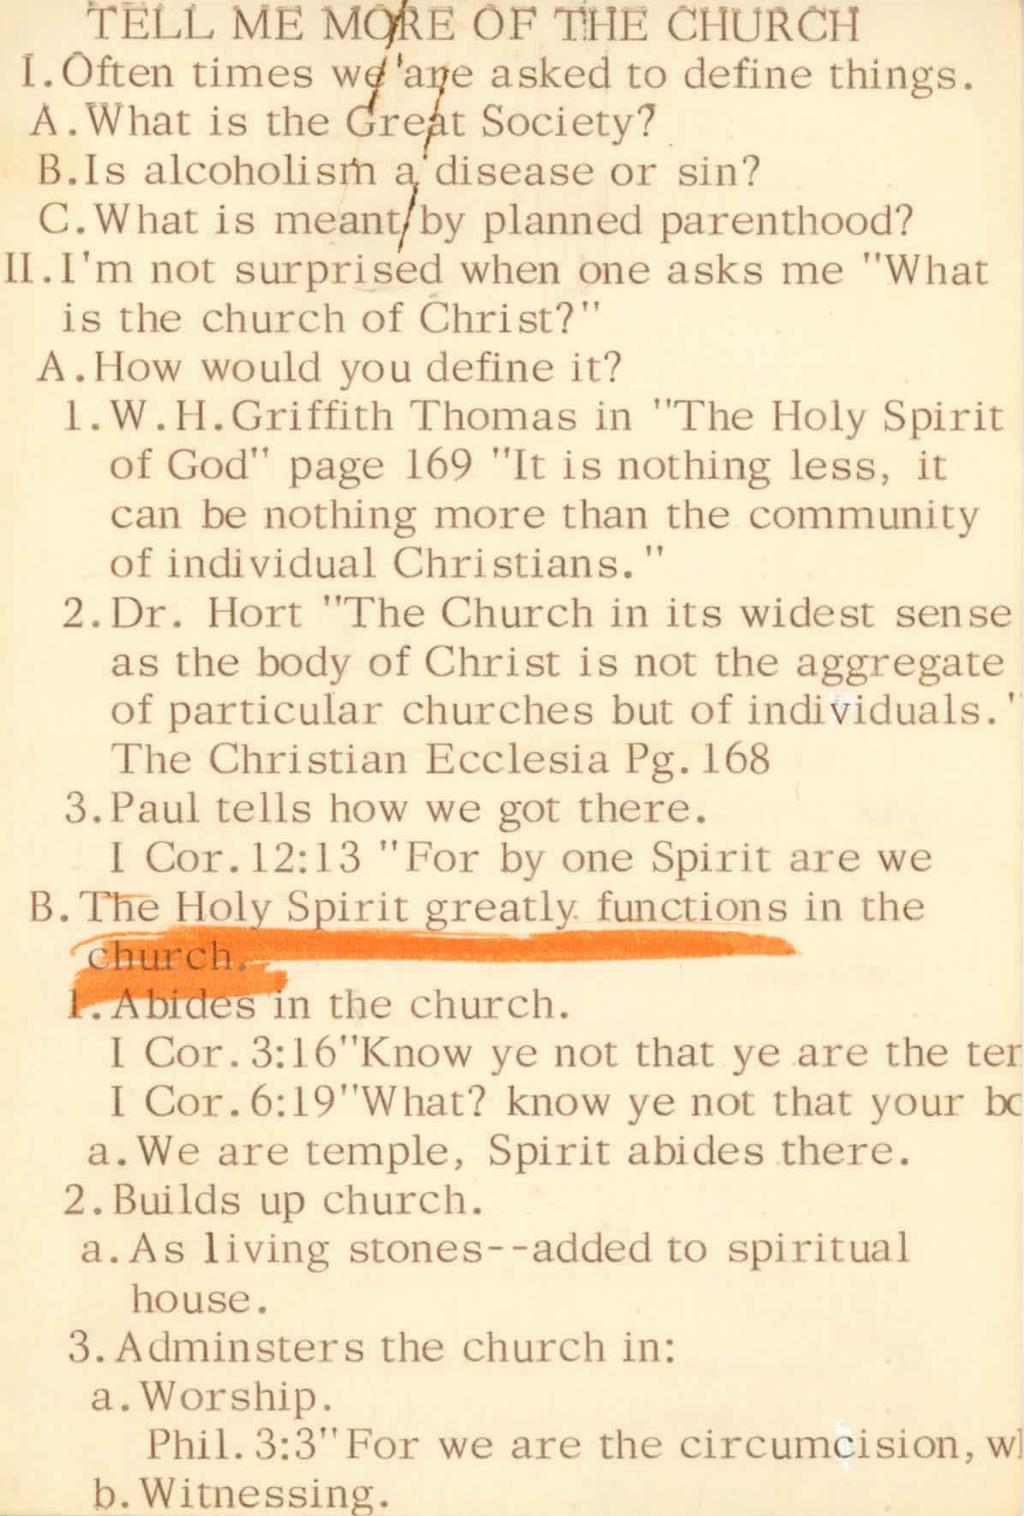 TELL ME MqRE OF THE CHURCH I. Often times wf/ 'a11e asked to define things. A. What is the drep.t Society? B. Is alcoholi srh a disease or sin? C. What is meant7by planned parenthood? 11.